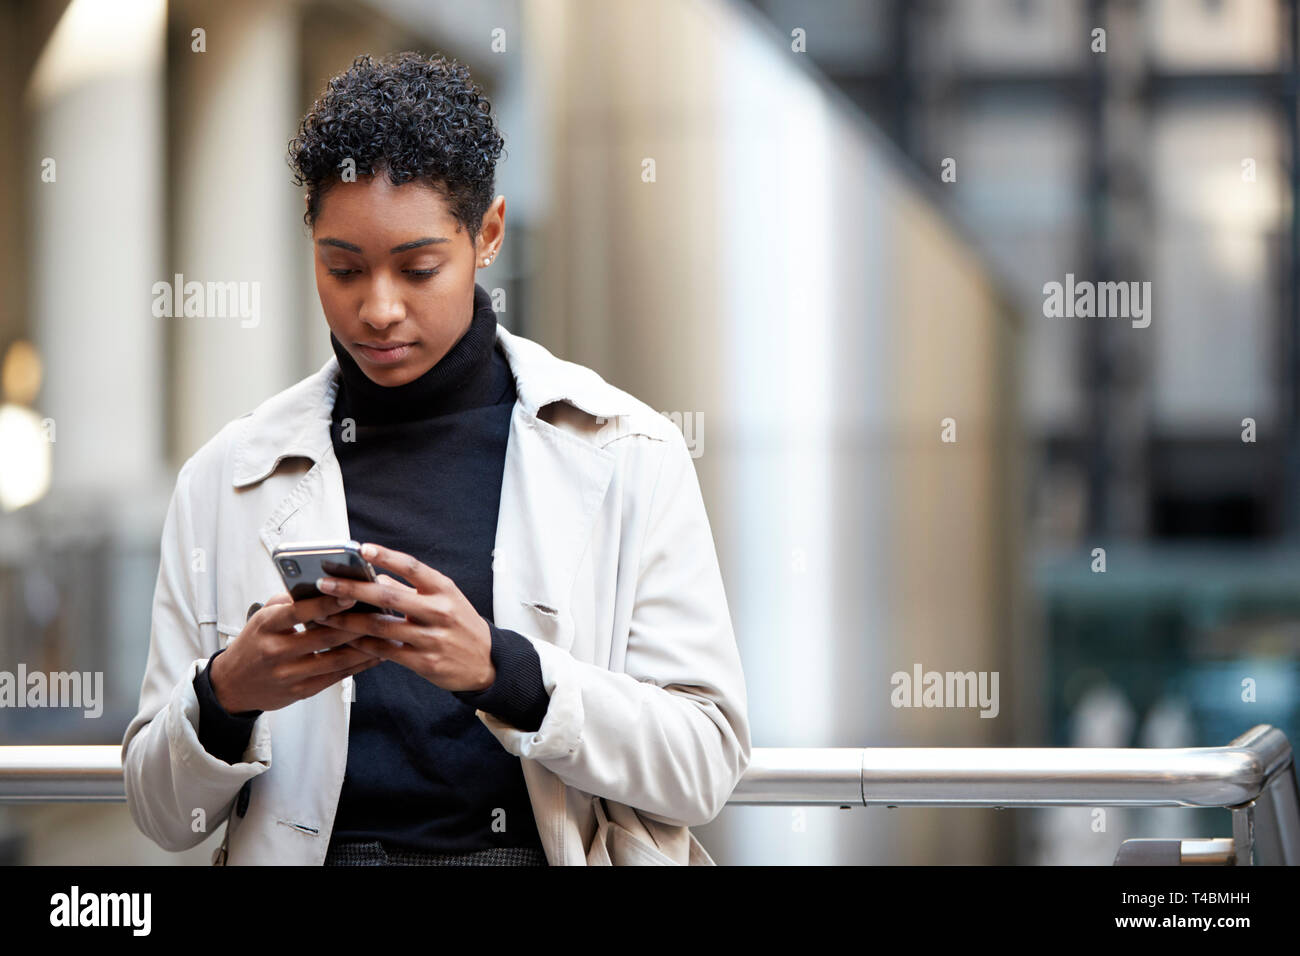 Young adult woman standing in a business area of the city using her smartphone, focus on foreground Stock Photo